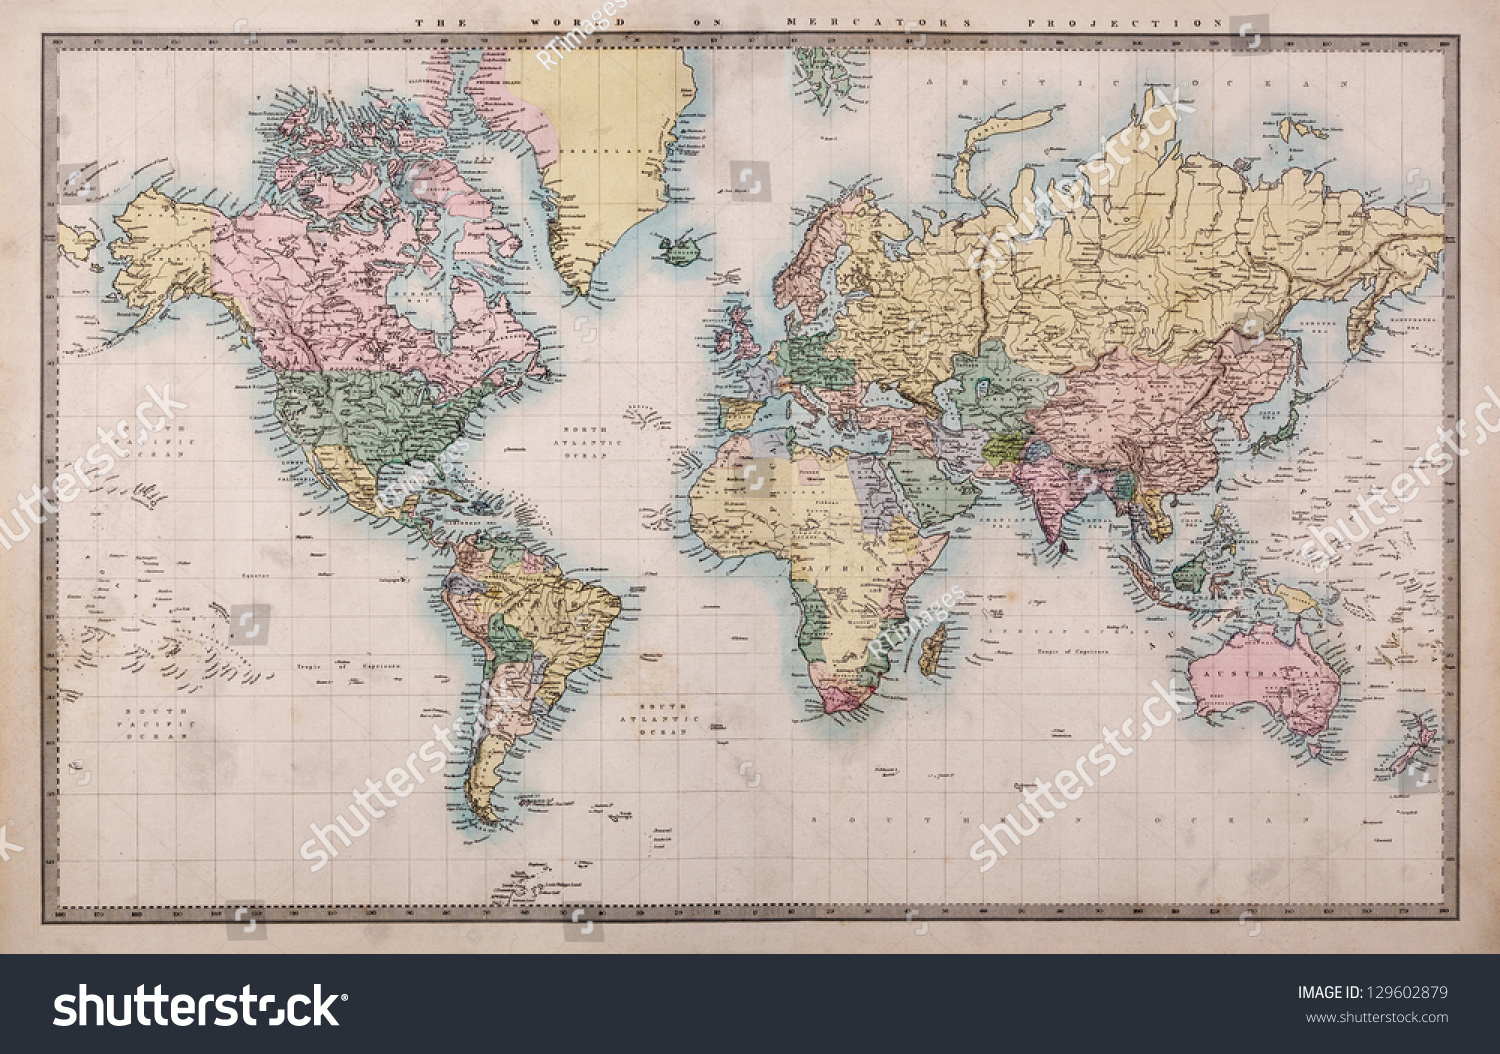 Original old hand coloured map of the World on Mercators projection circa 1860,the countries are named as they were then i.e. Persia, Arabia etc. a few stains as expected for a map over 150 years old. #129602879